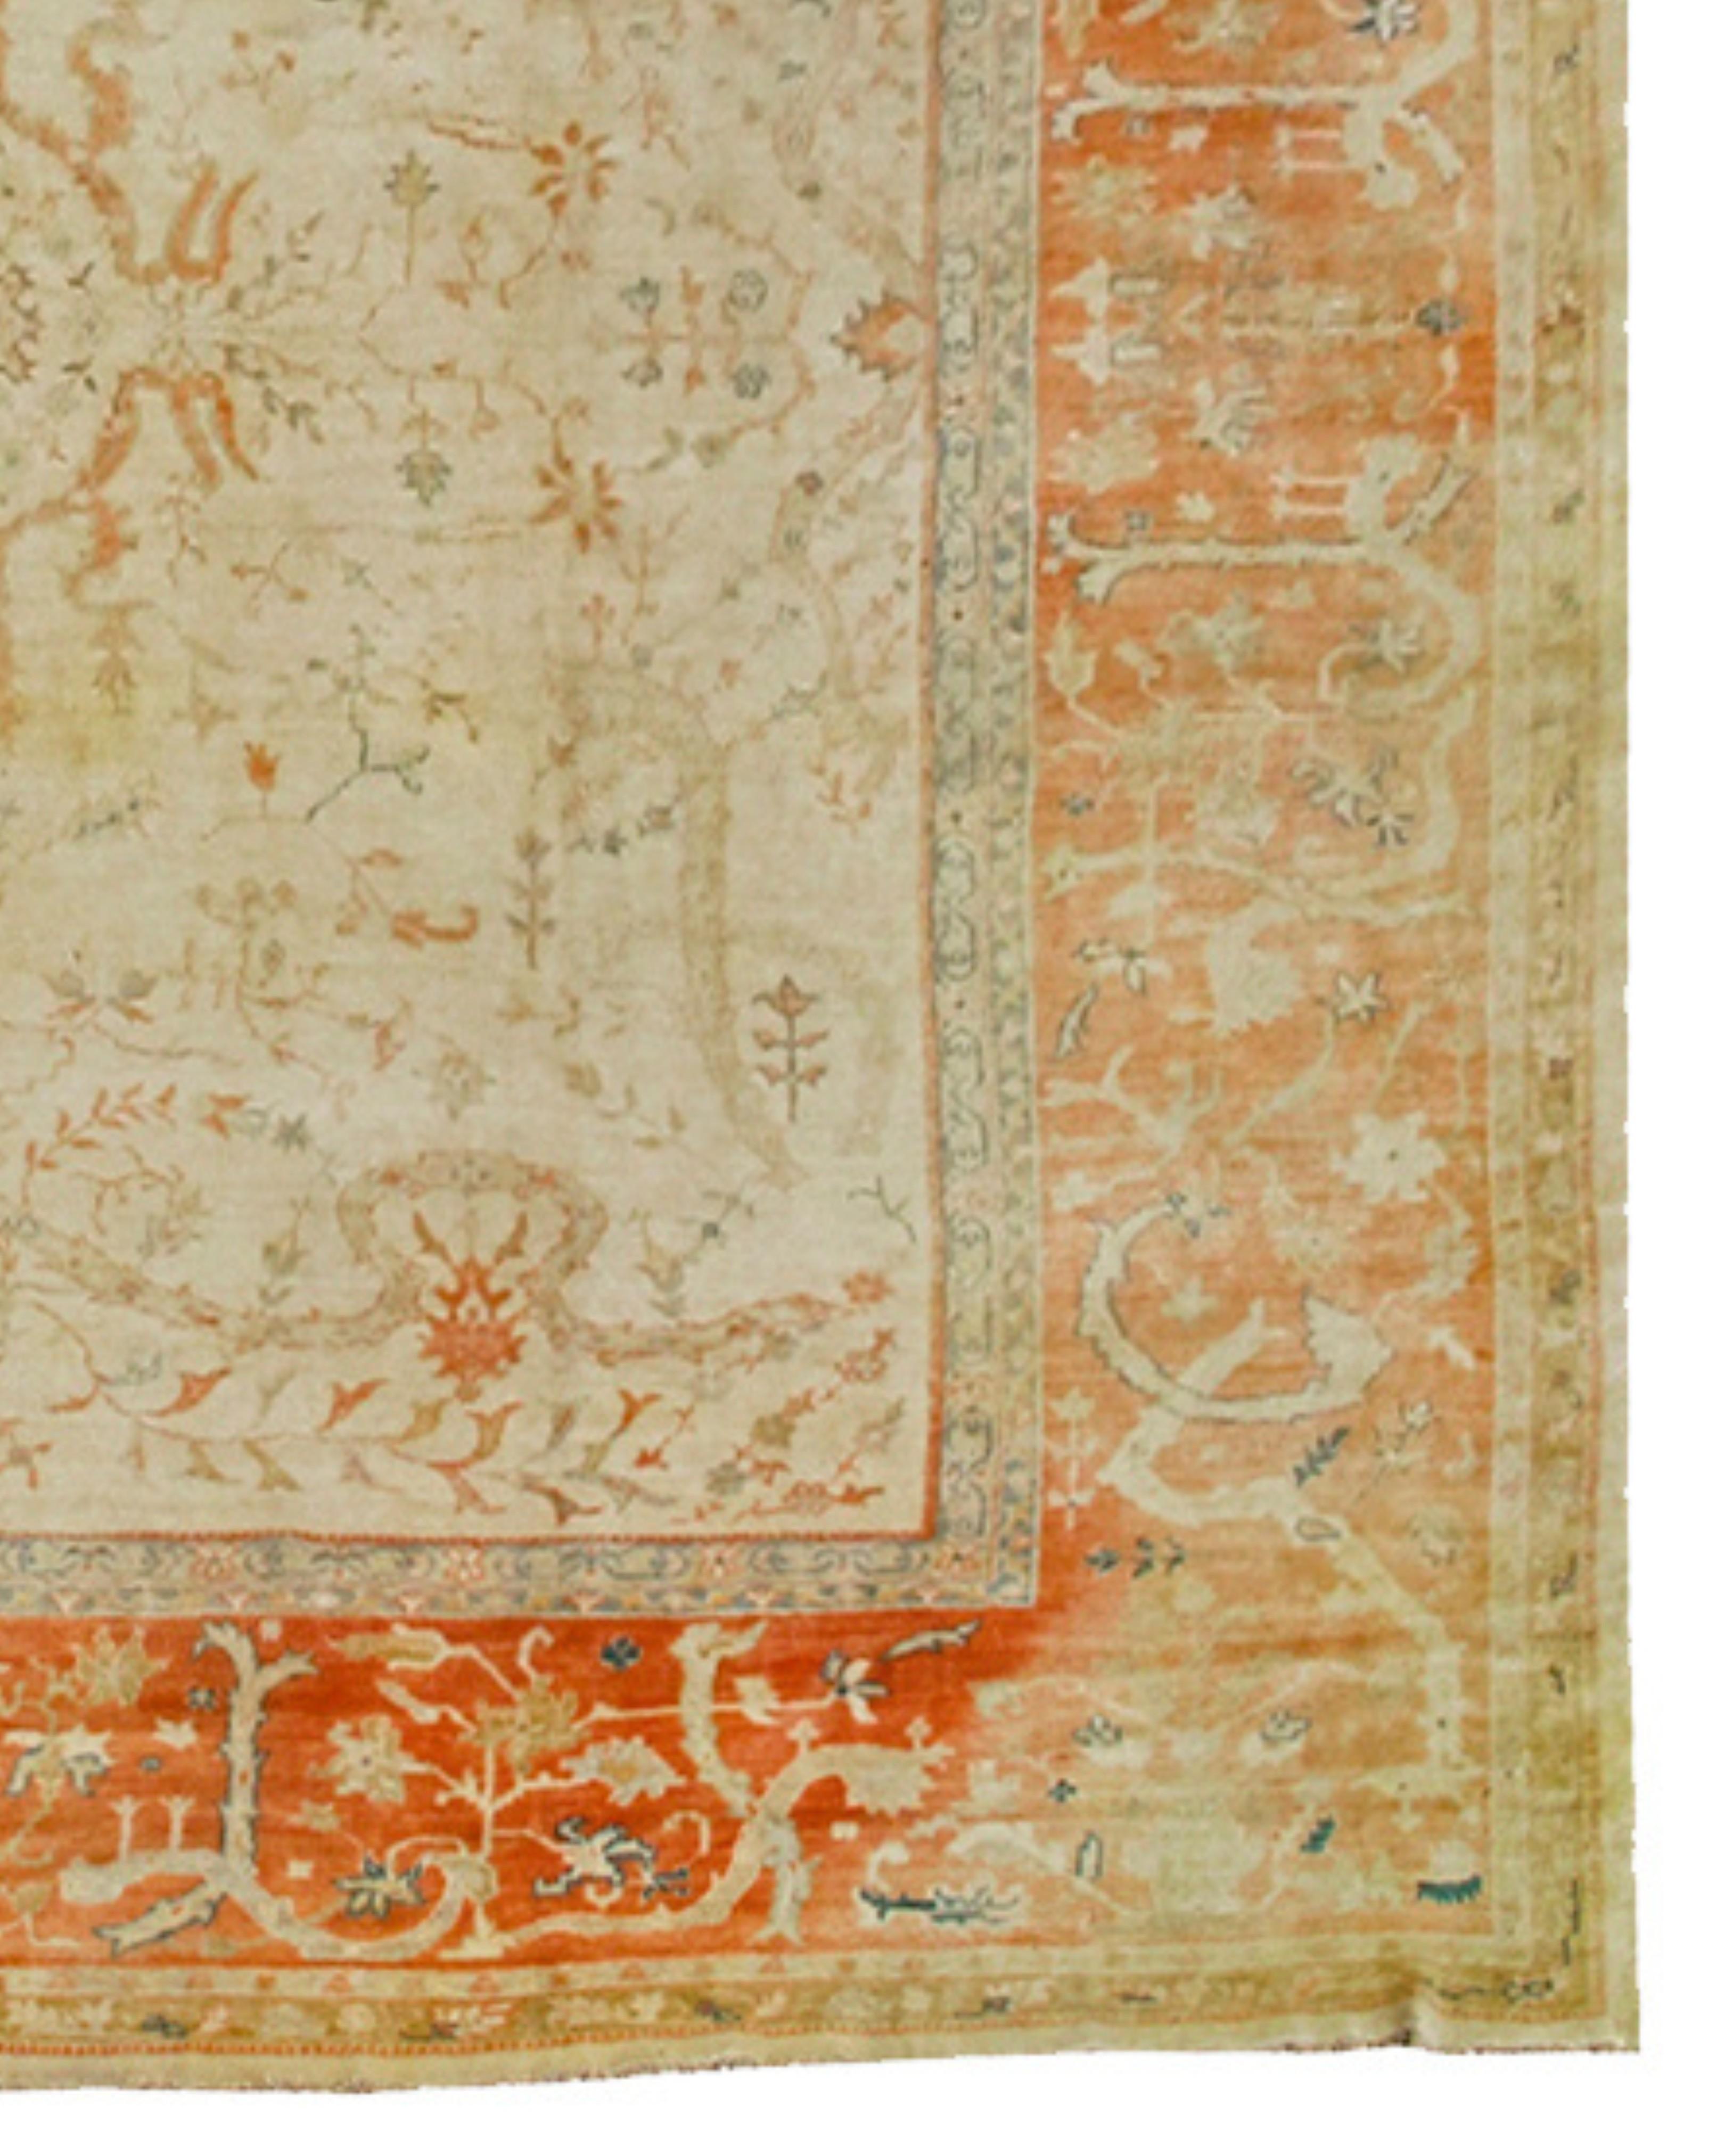 Antique Large Oversized Anatolian Borlu Rug, Early 20th Century

Antique Borlu carpets from western Anatolia combine the soft tones of neighboring Oushak pieces with a sturdier and tighter weave. The pale ivory ground of this piece is framed by an